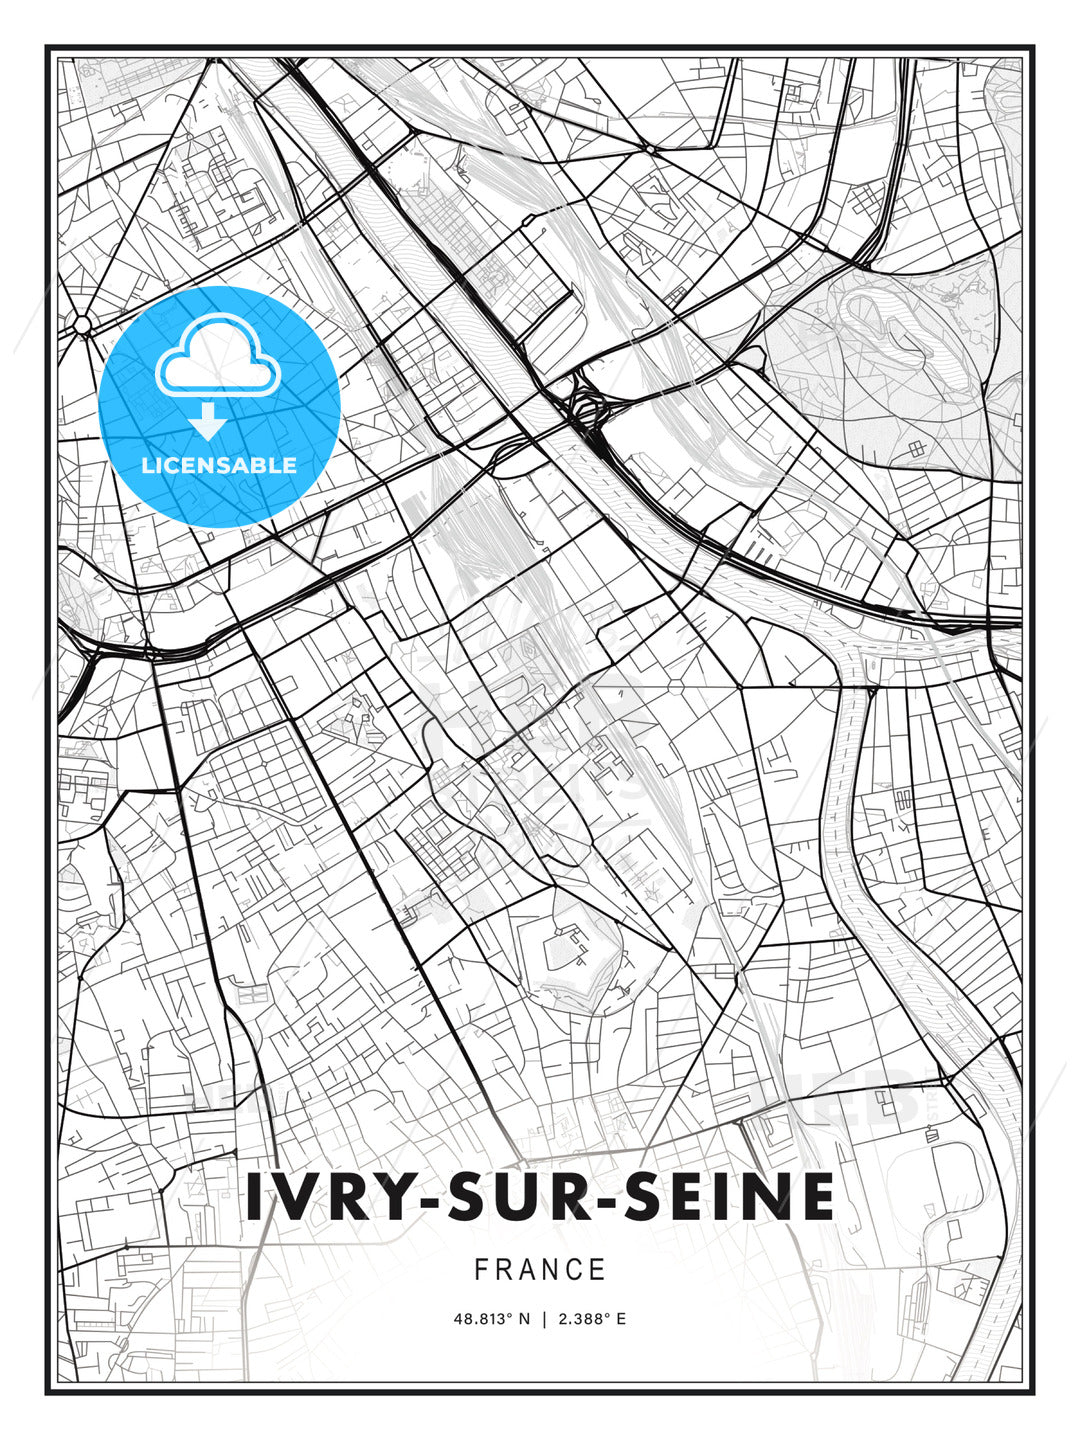 Ivry-sur-Seine, France, Modern Print Template in Various Formats - HEBSTREITS Sketches